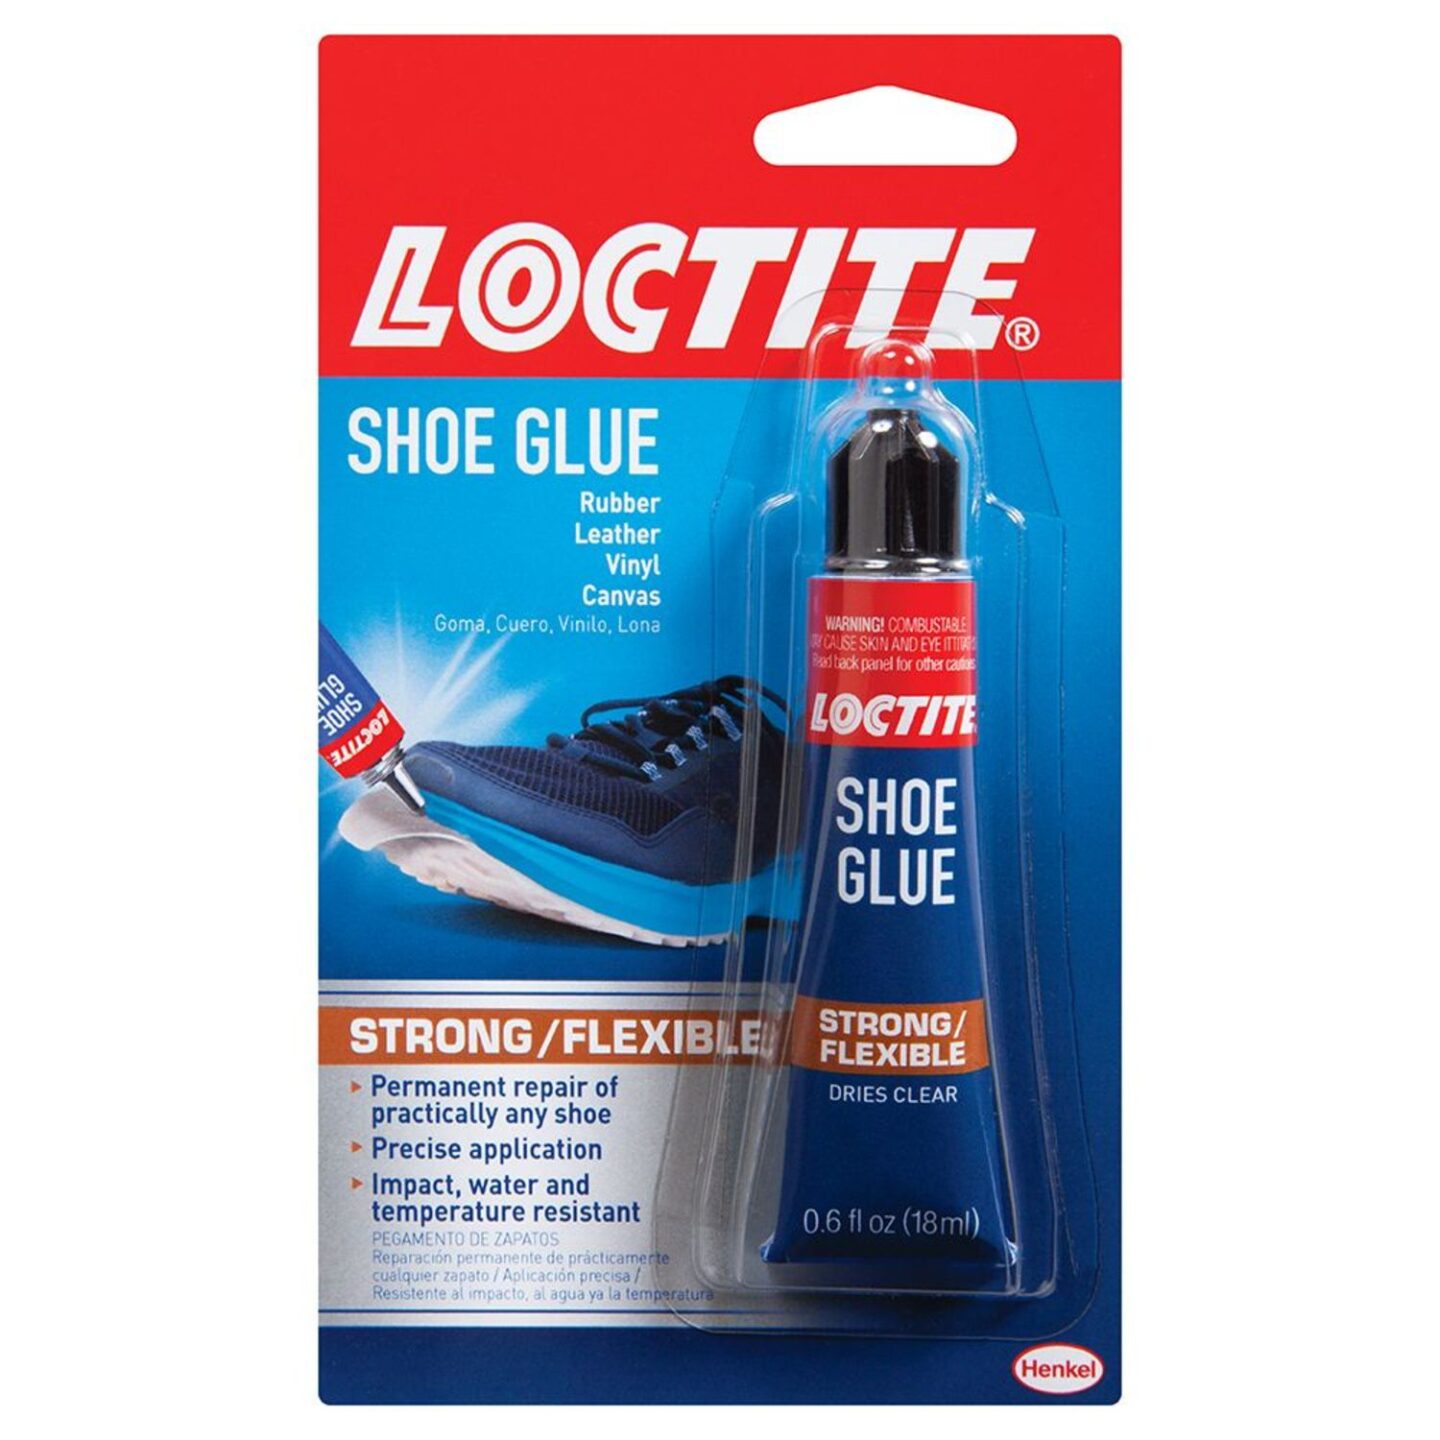 Loctite Shoe Glue for Shoe Repair as best glue for shoes.